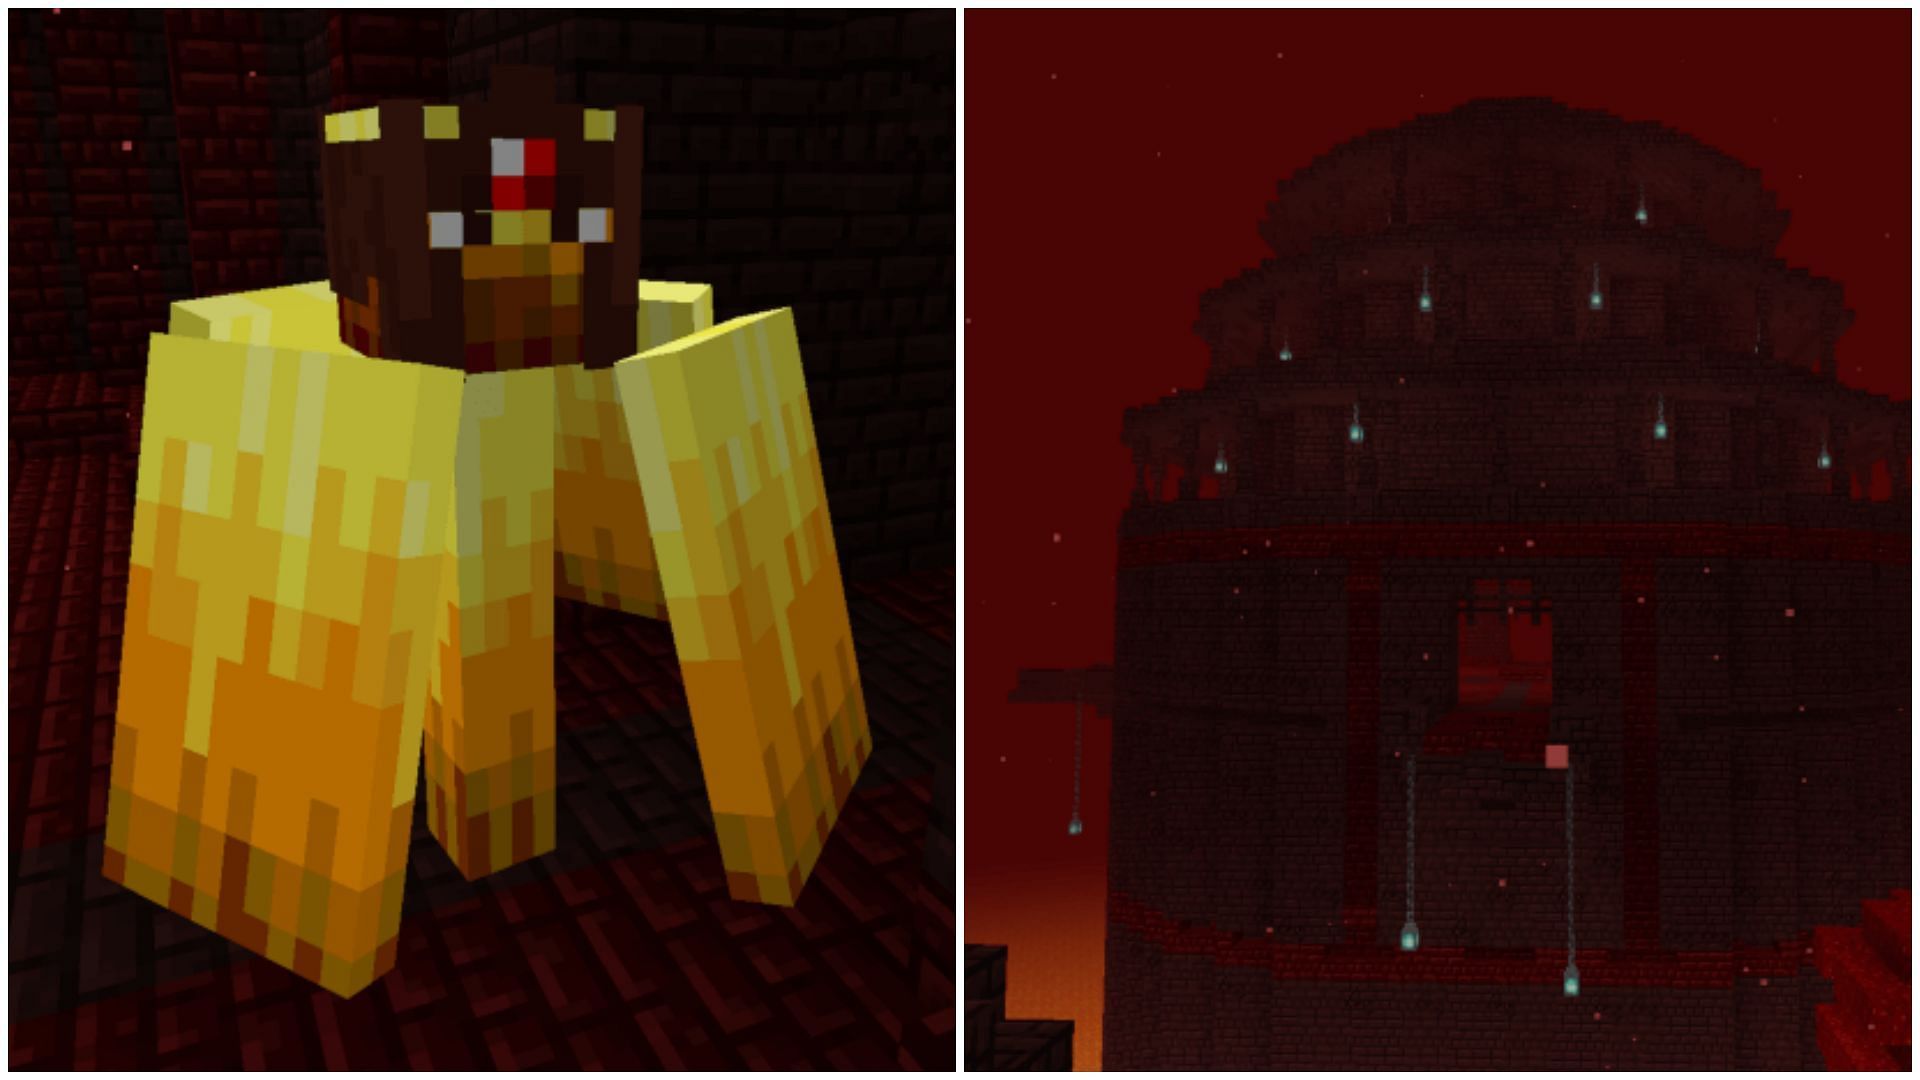 Nether will have Wildfire dwelling in the new Citadel structure in Minecraft (Image via CurseForge/Faboslav)